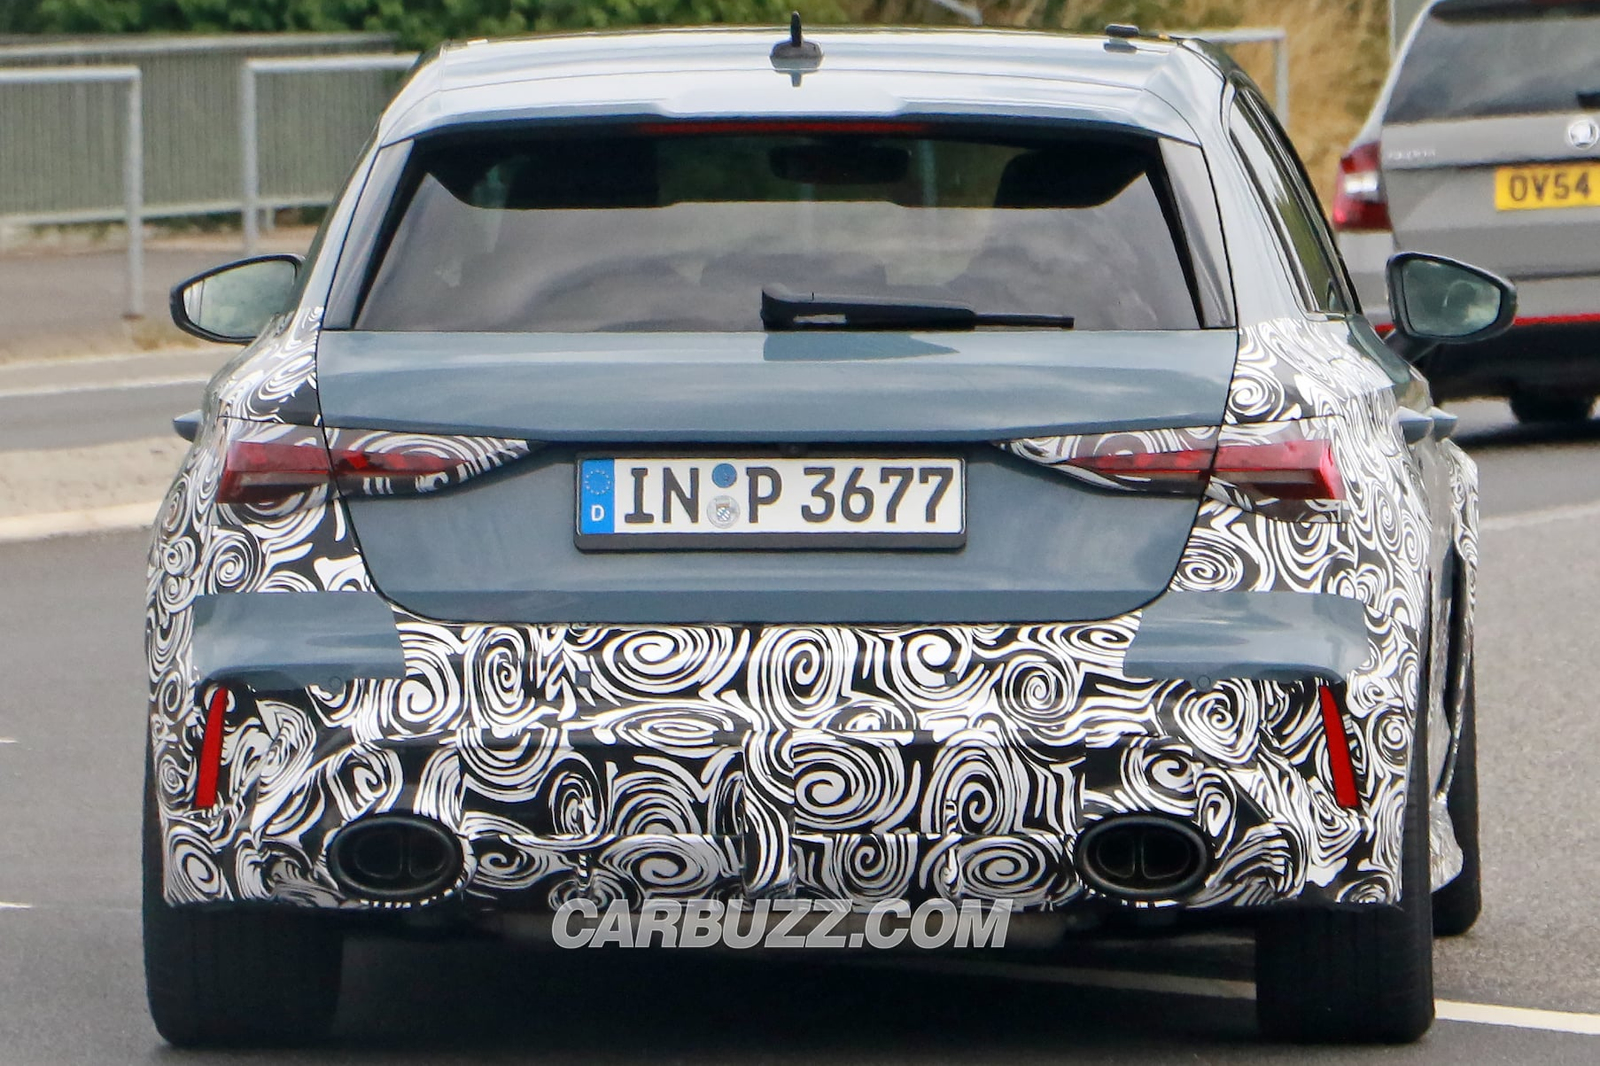 spy shots, sports cars, audi rs3 facelift spotted hiding heavy aesthetic updates